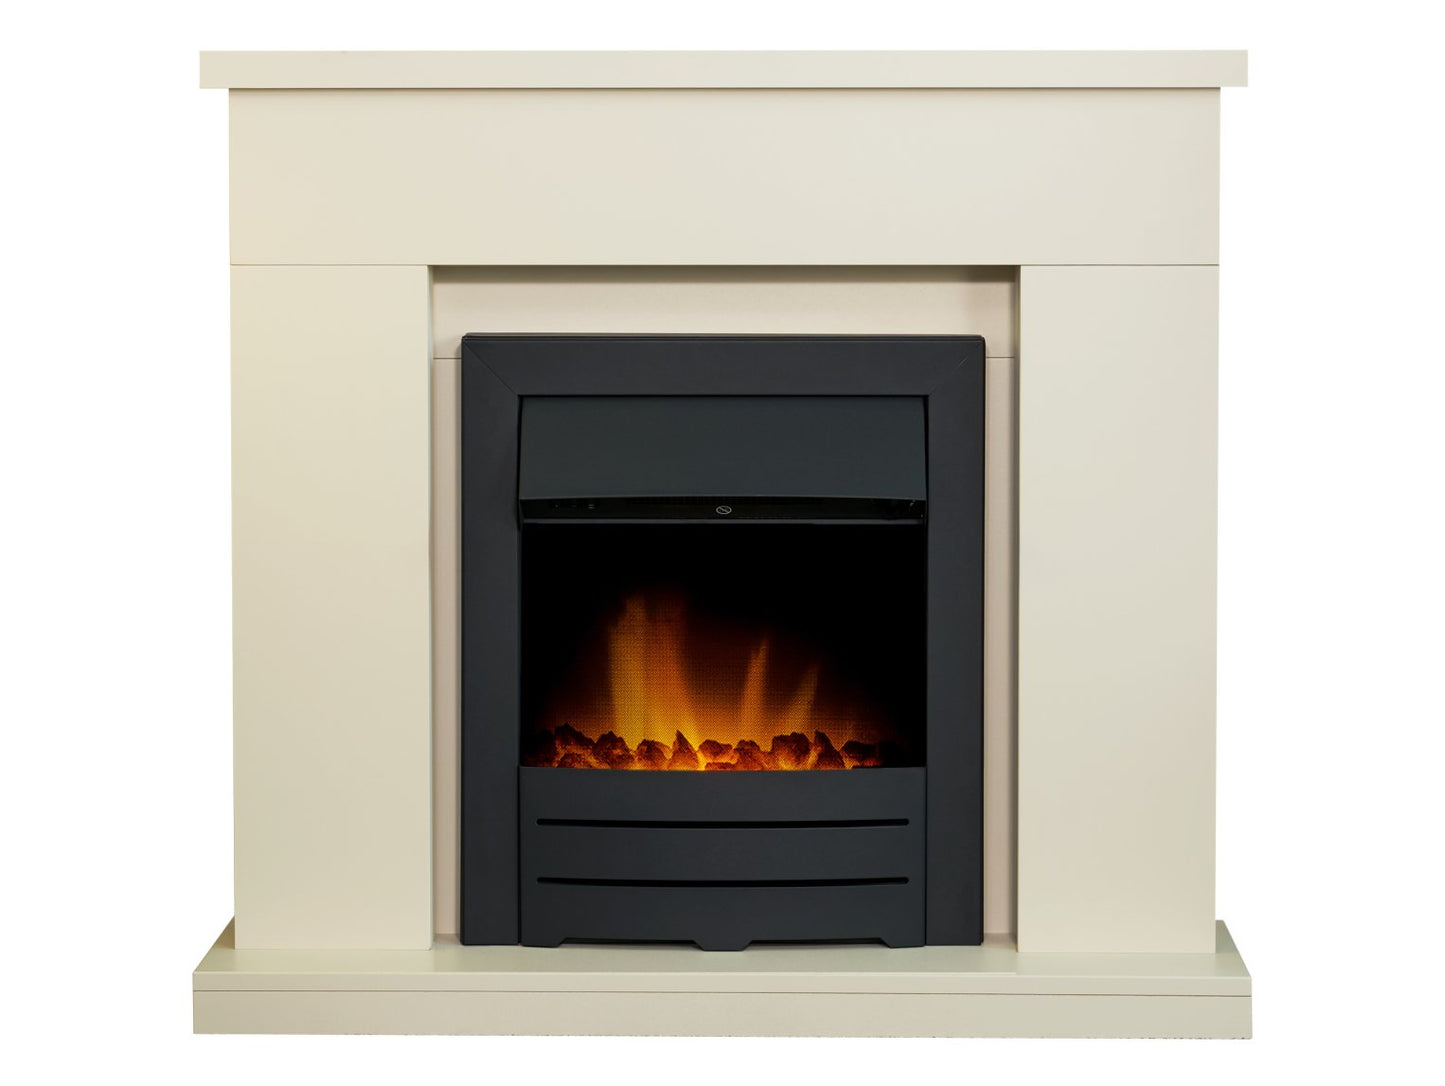 Adam Lomond Fireplace in Stone Effect with Colorado Electric Fire in Black, 39 Inch